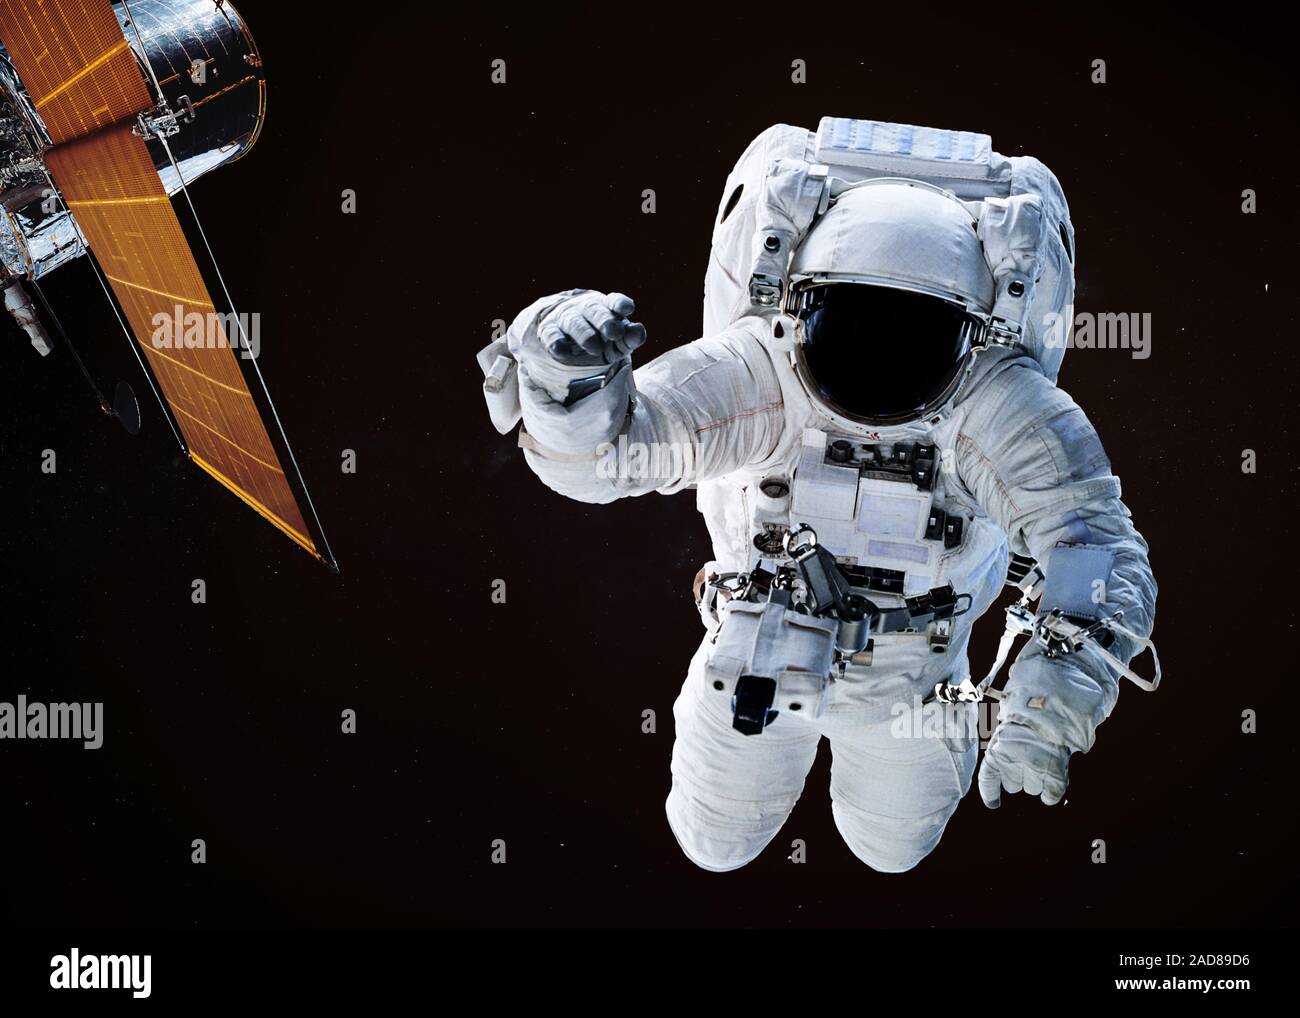 Wallpaper Discovery Stock Photos Wallpaper Discovery Stock Images, Photos, Reviews